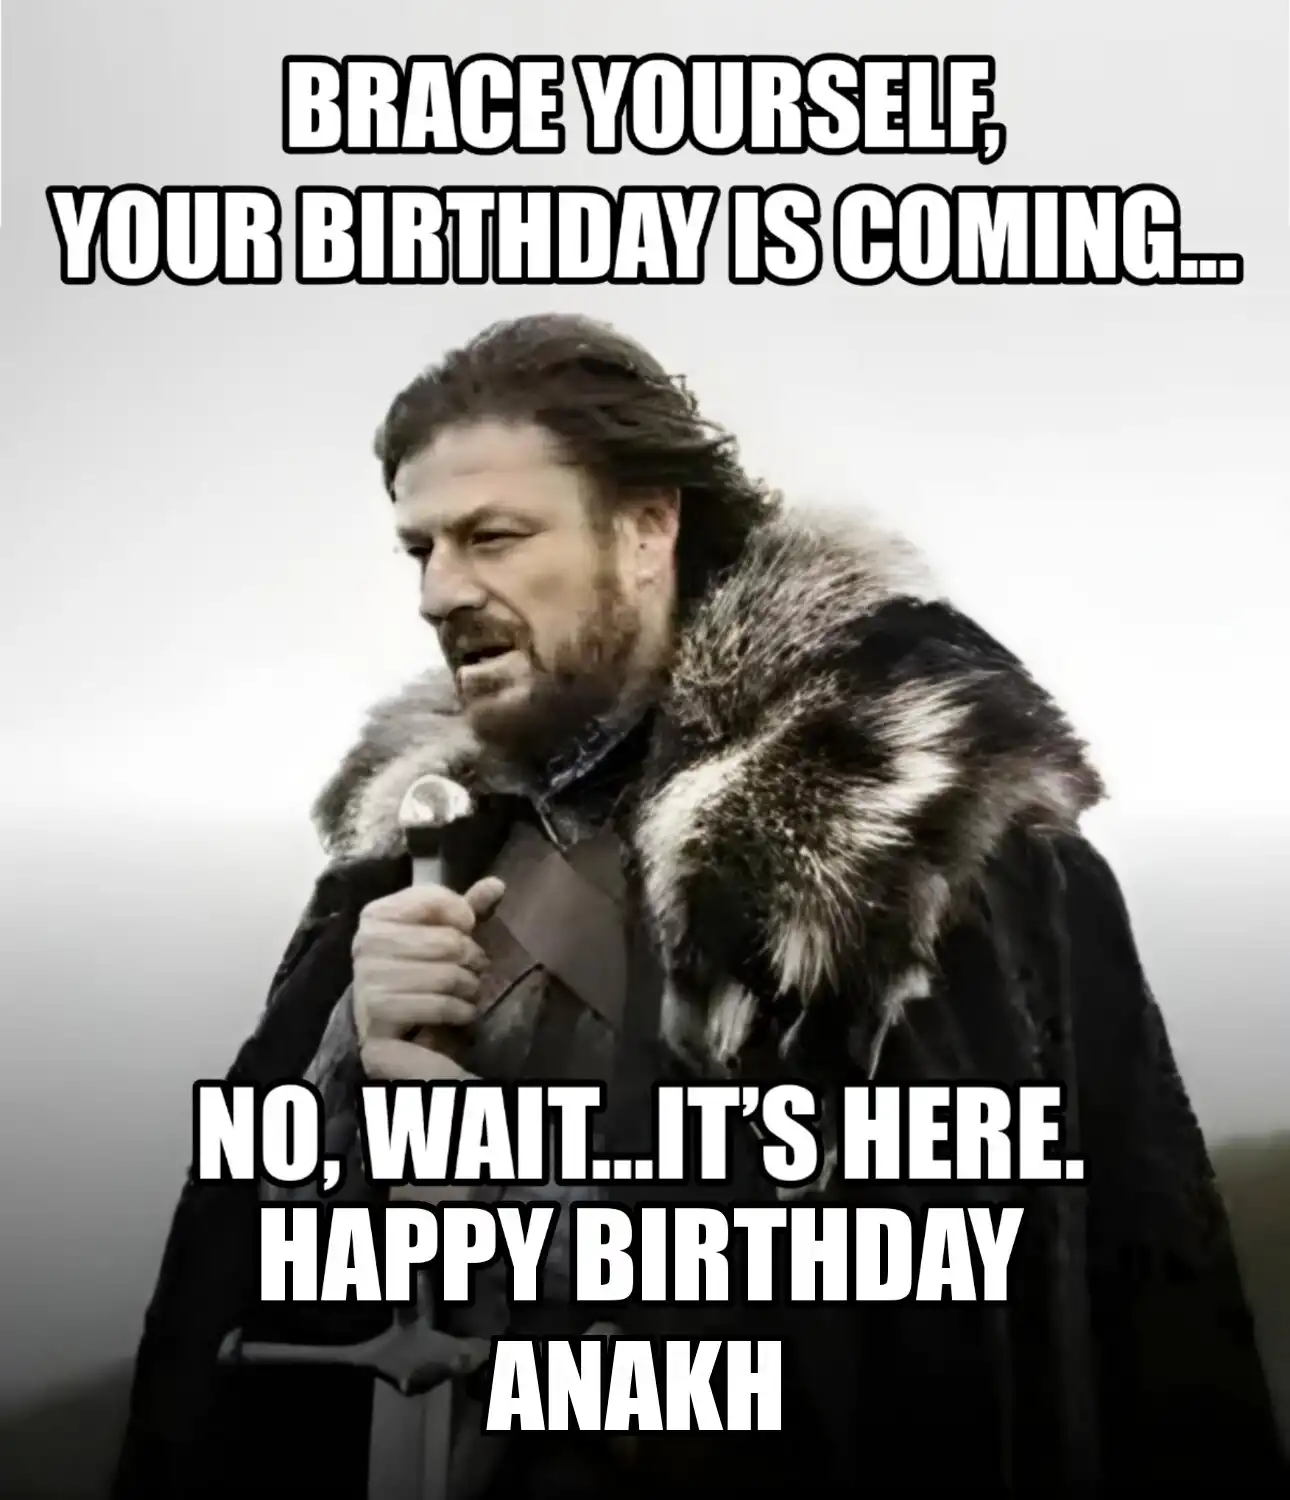 Happy Birthday Anakh Brace Yourself Your Birthday Is Coming Meme